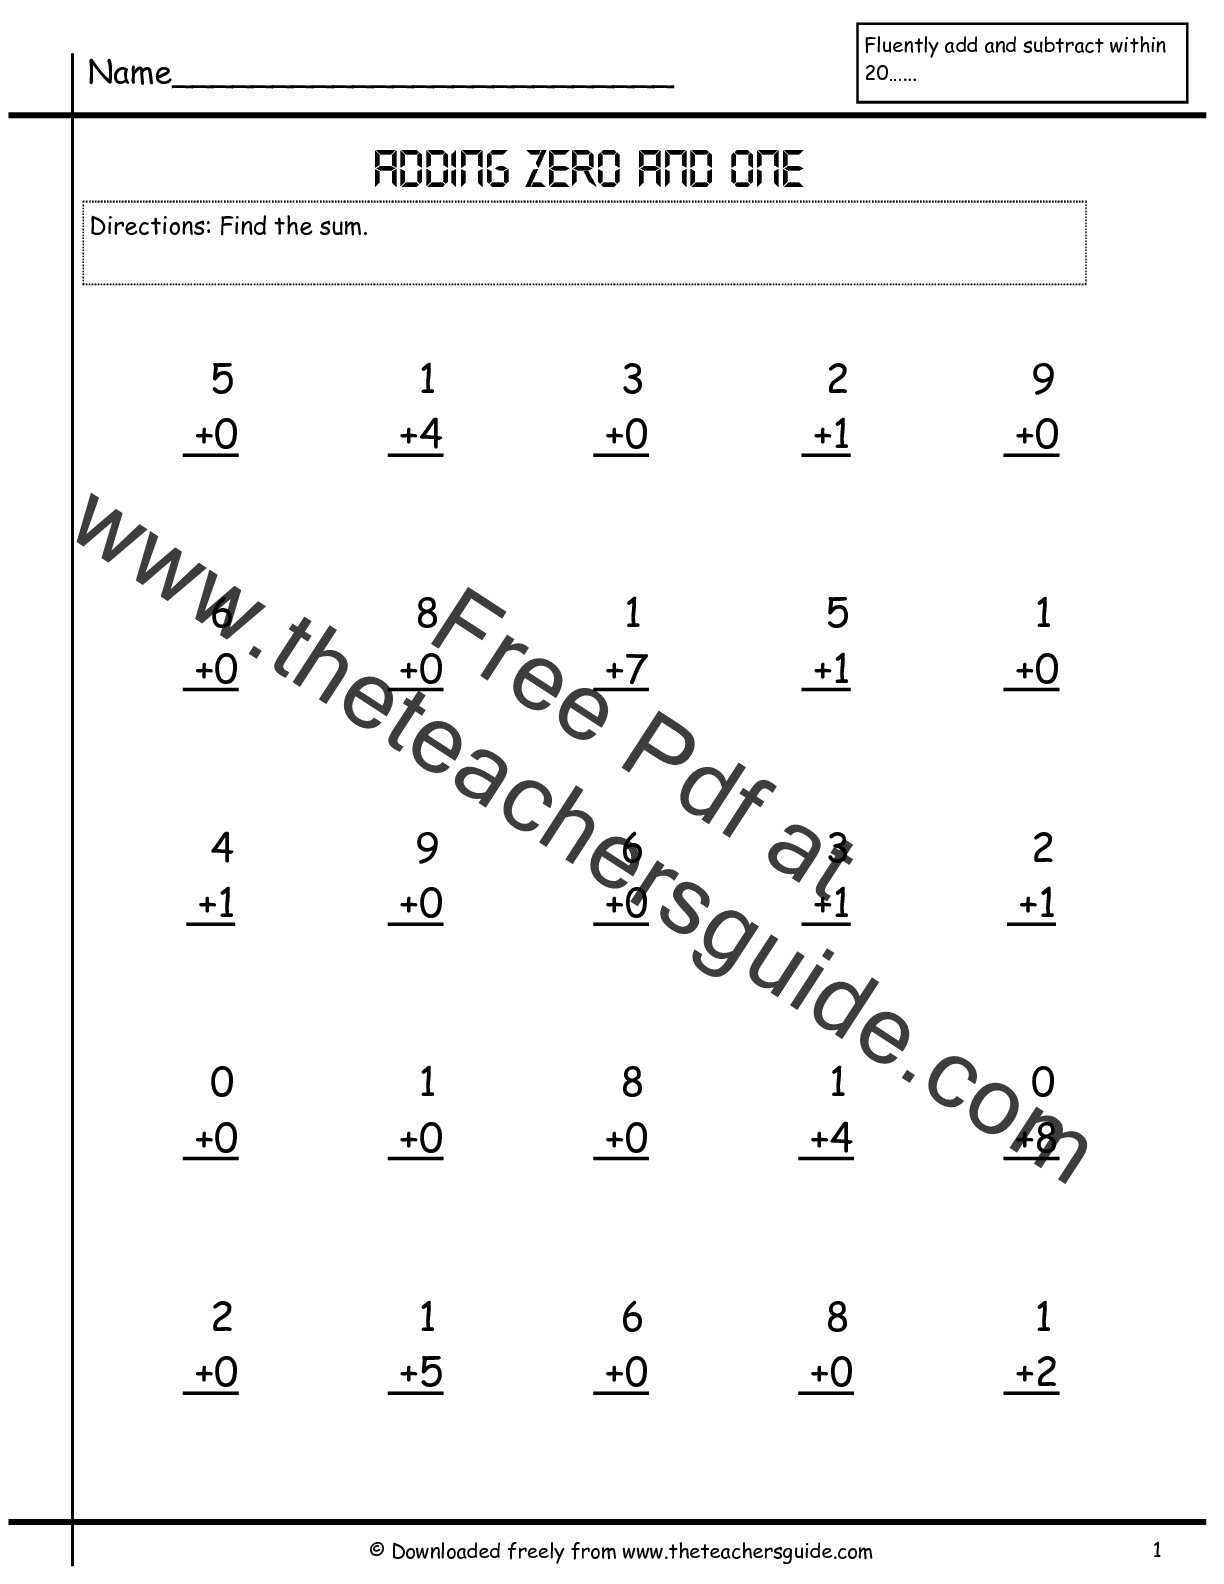 single-digit-addition-worksheets-from-the-teacher-s-guide